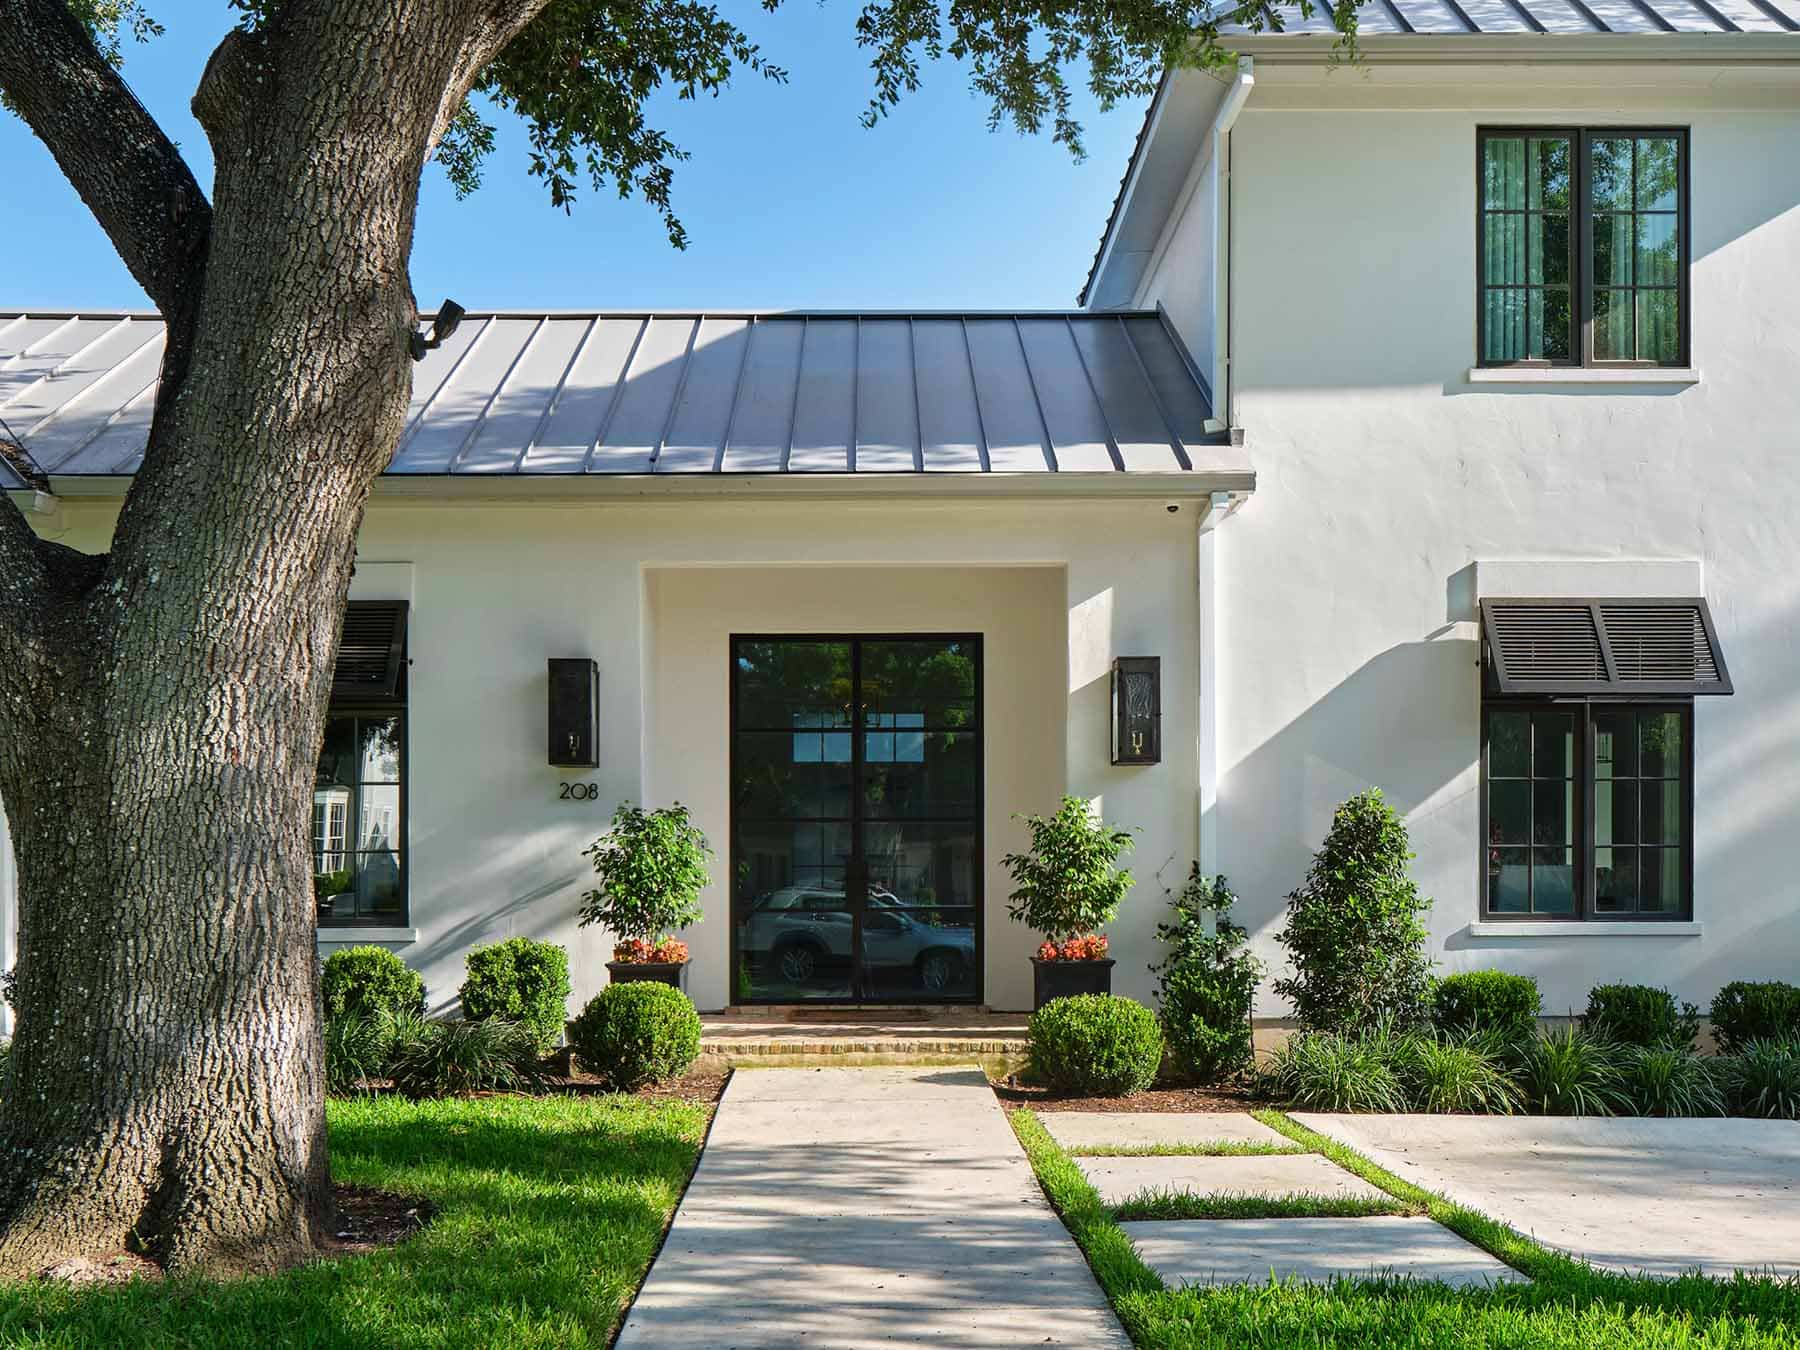 Alamo Heights TX home exterior in Sherwin Williams 7014 Eider White by Paper Moon Painting, house painter